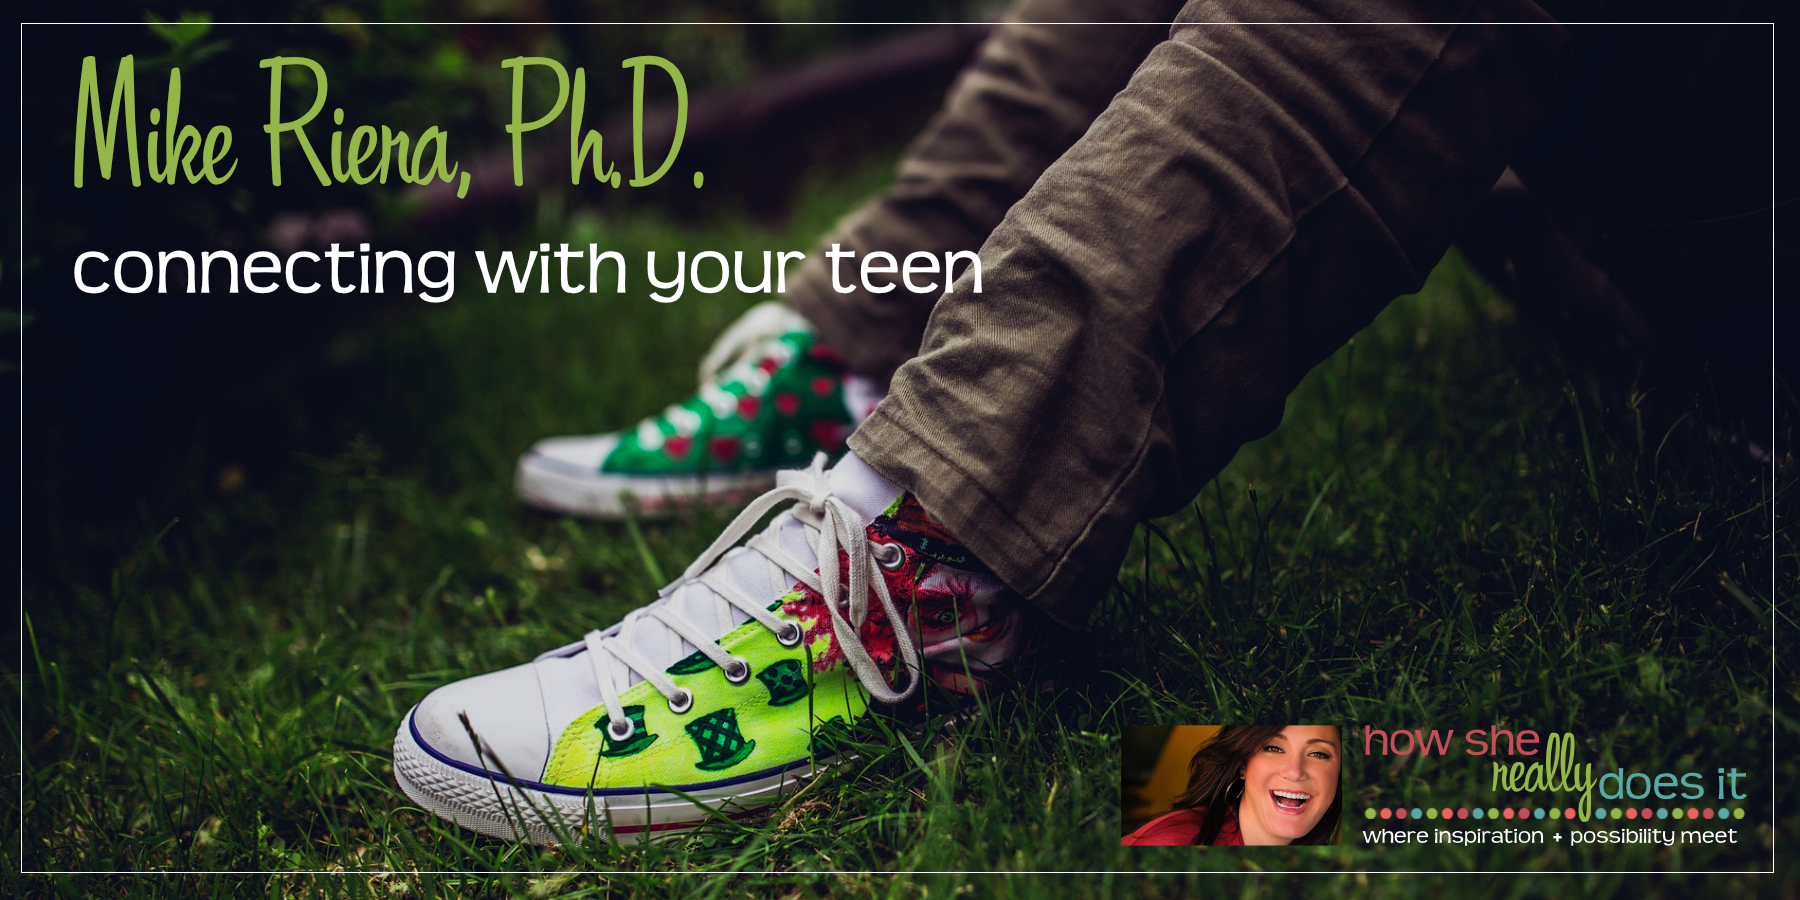 Mike Riera, Ph.D. Connecting with your teen.